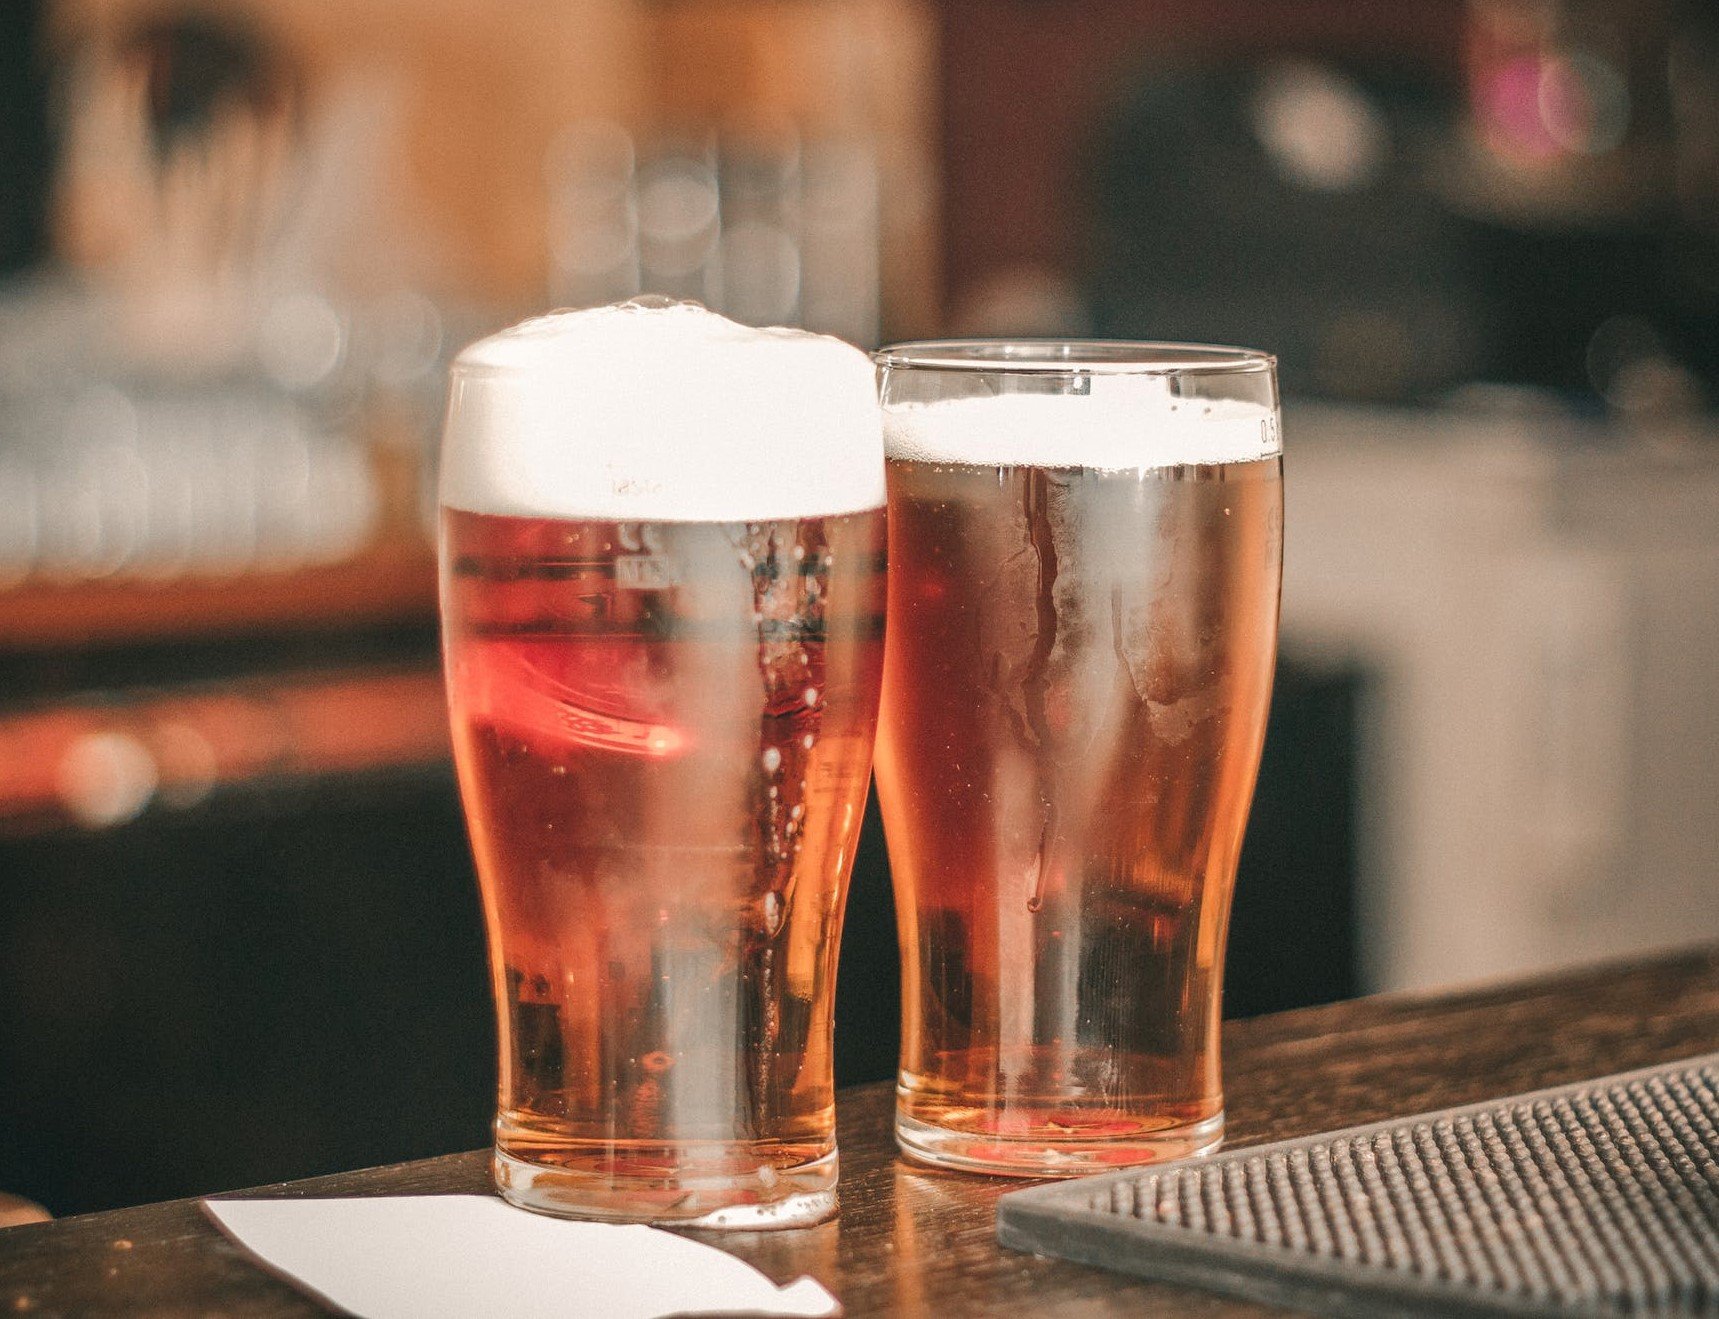 An image of two pints of beer